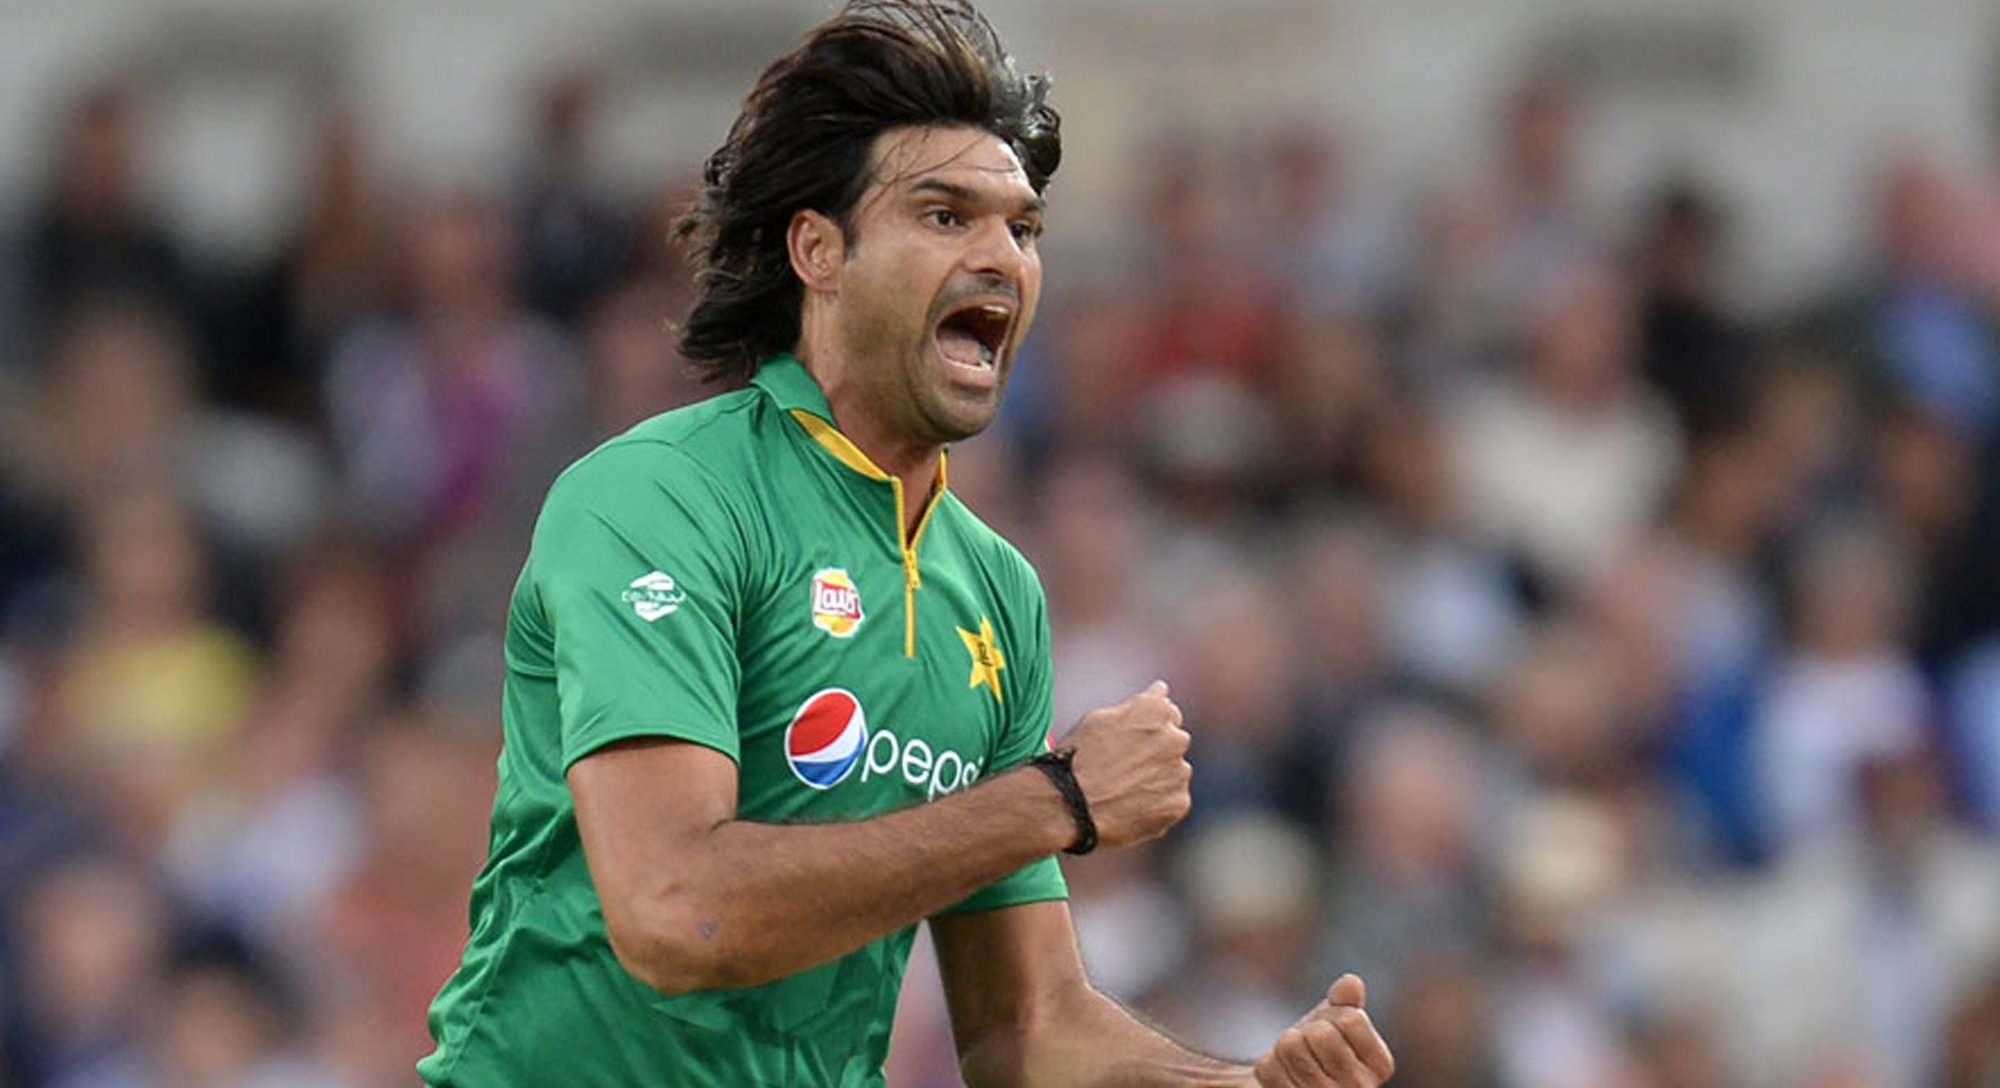 irfan aims to become best bowler in psl4